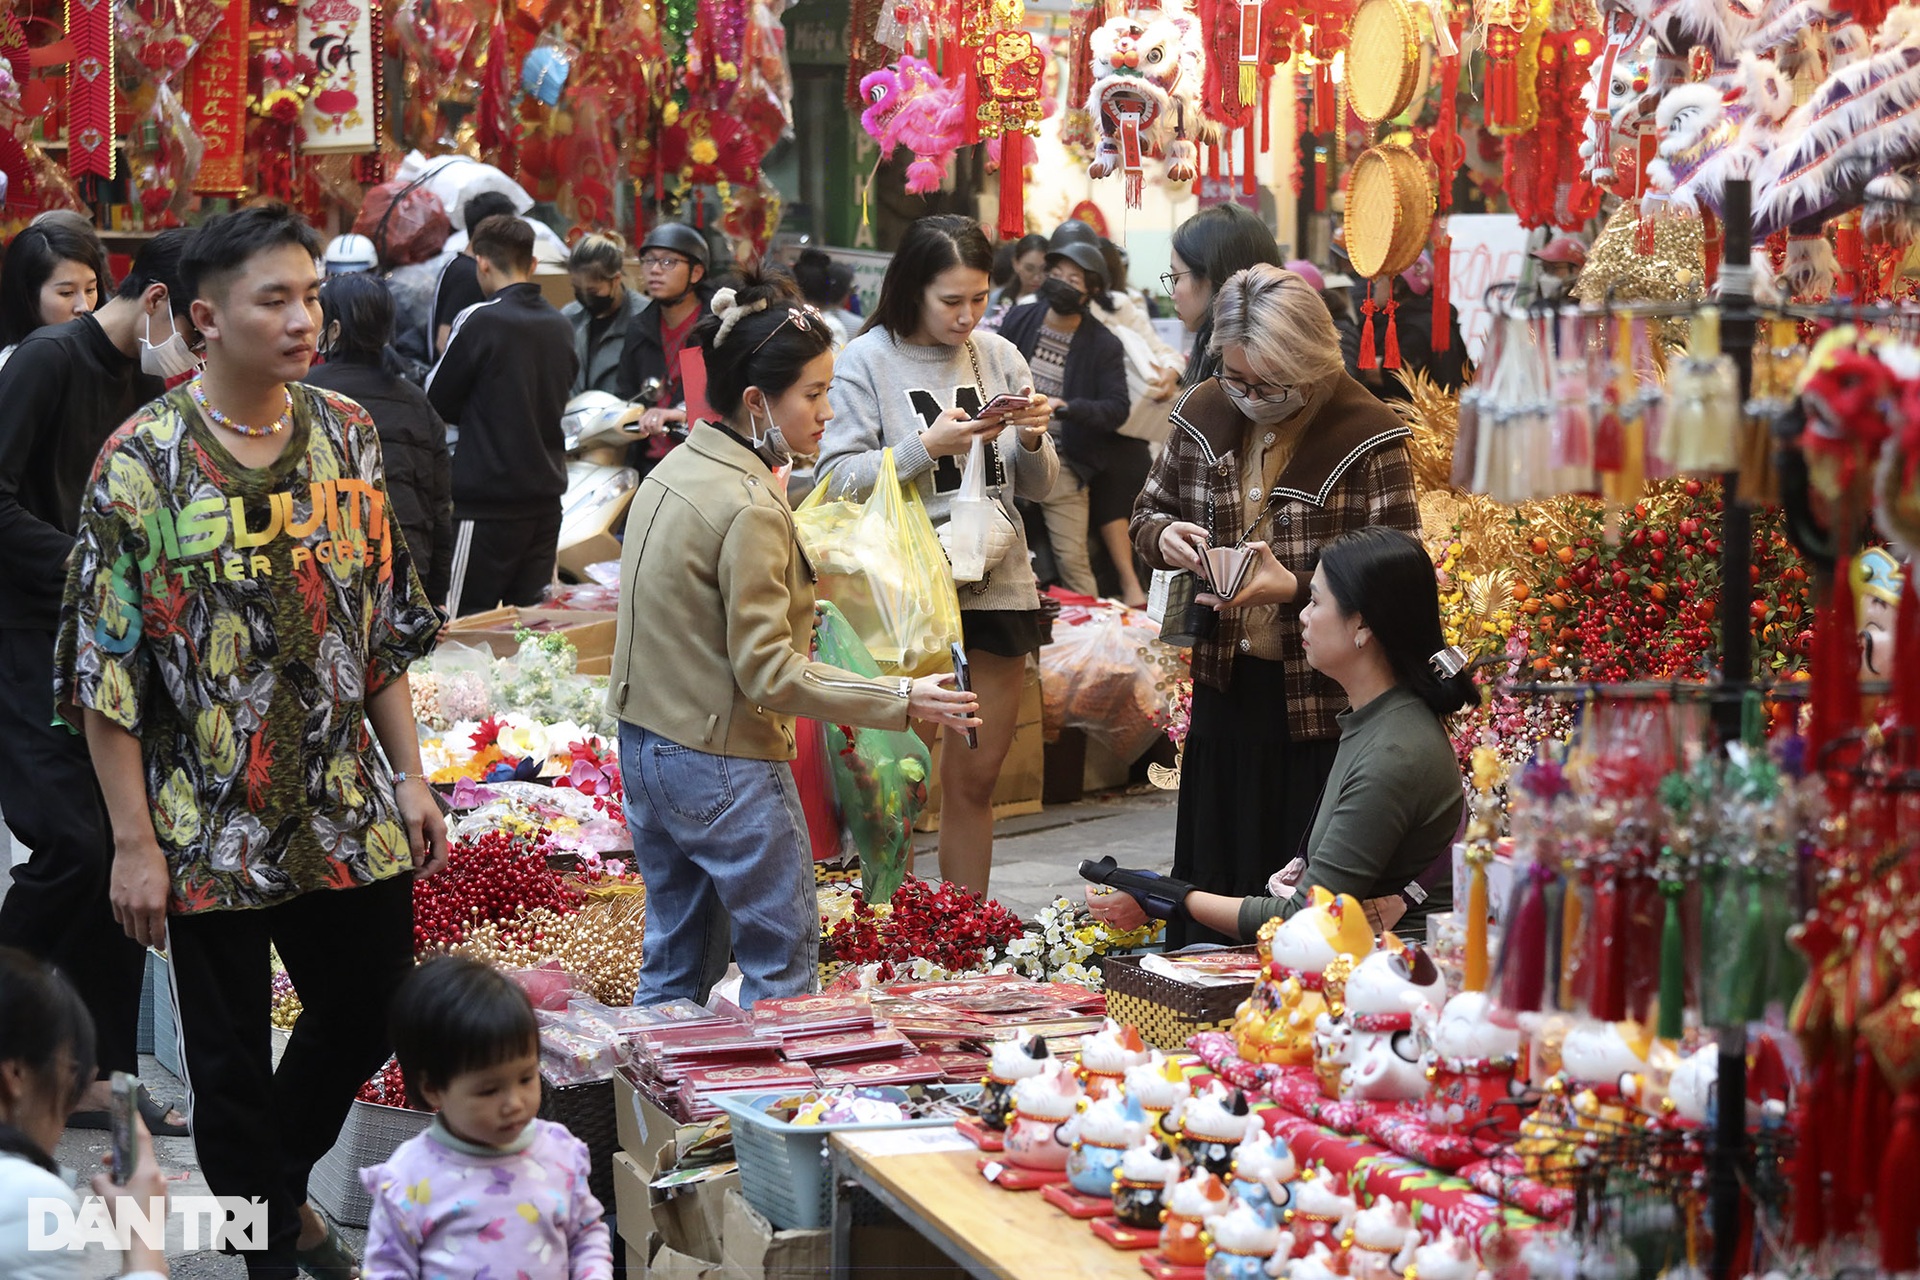 The vibrant flower market meets only once a year - 15